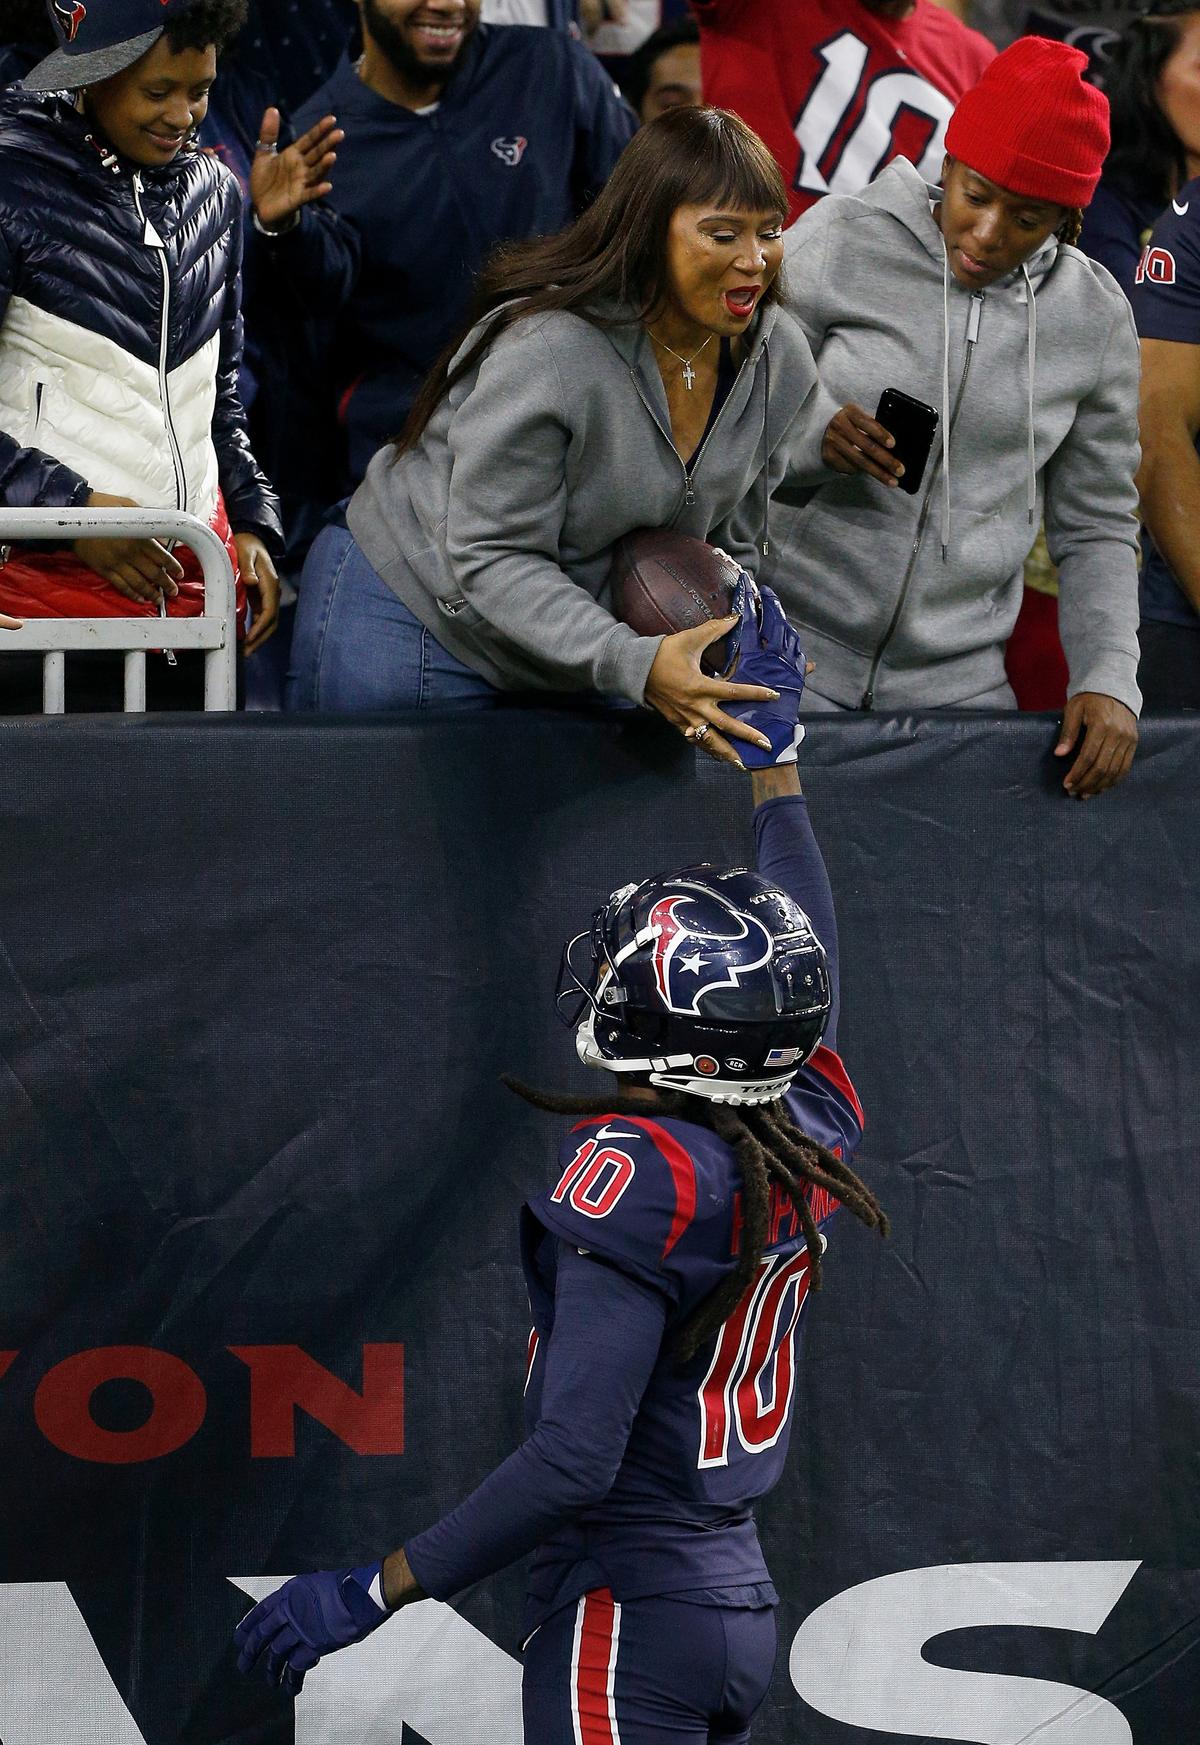 Hopkins, #10 of the Houston Texans, hands the ball to his mom after a touchdown in the second quarter against the Indianapolis Colts on Nov. 21, 2019. (©Getty Images | <a href="https://www.gettyimages.com/detail/news-photo/wide-receiver-deandre-hopkins-of-the-houston-texans-hand-news-photo/1189249696">Bob Levey</a>)